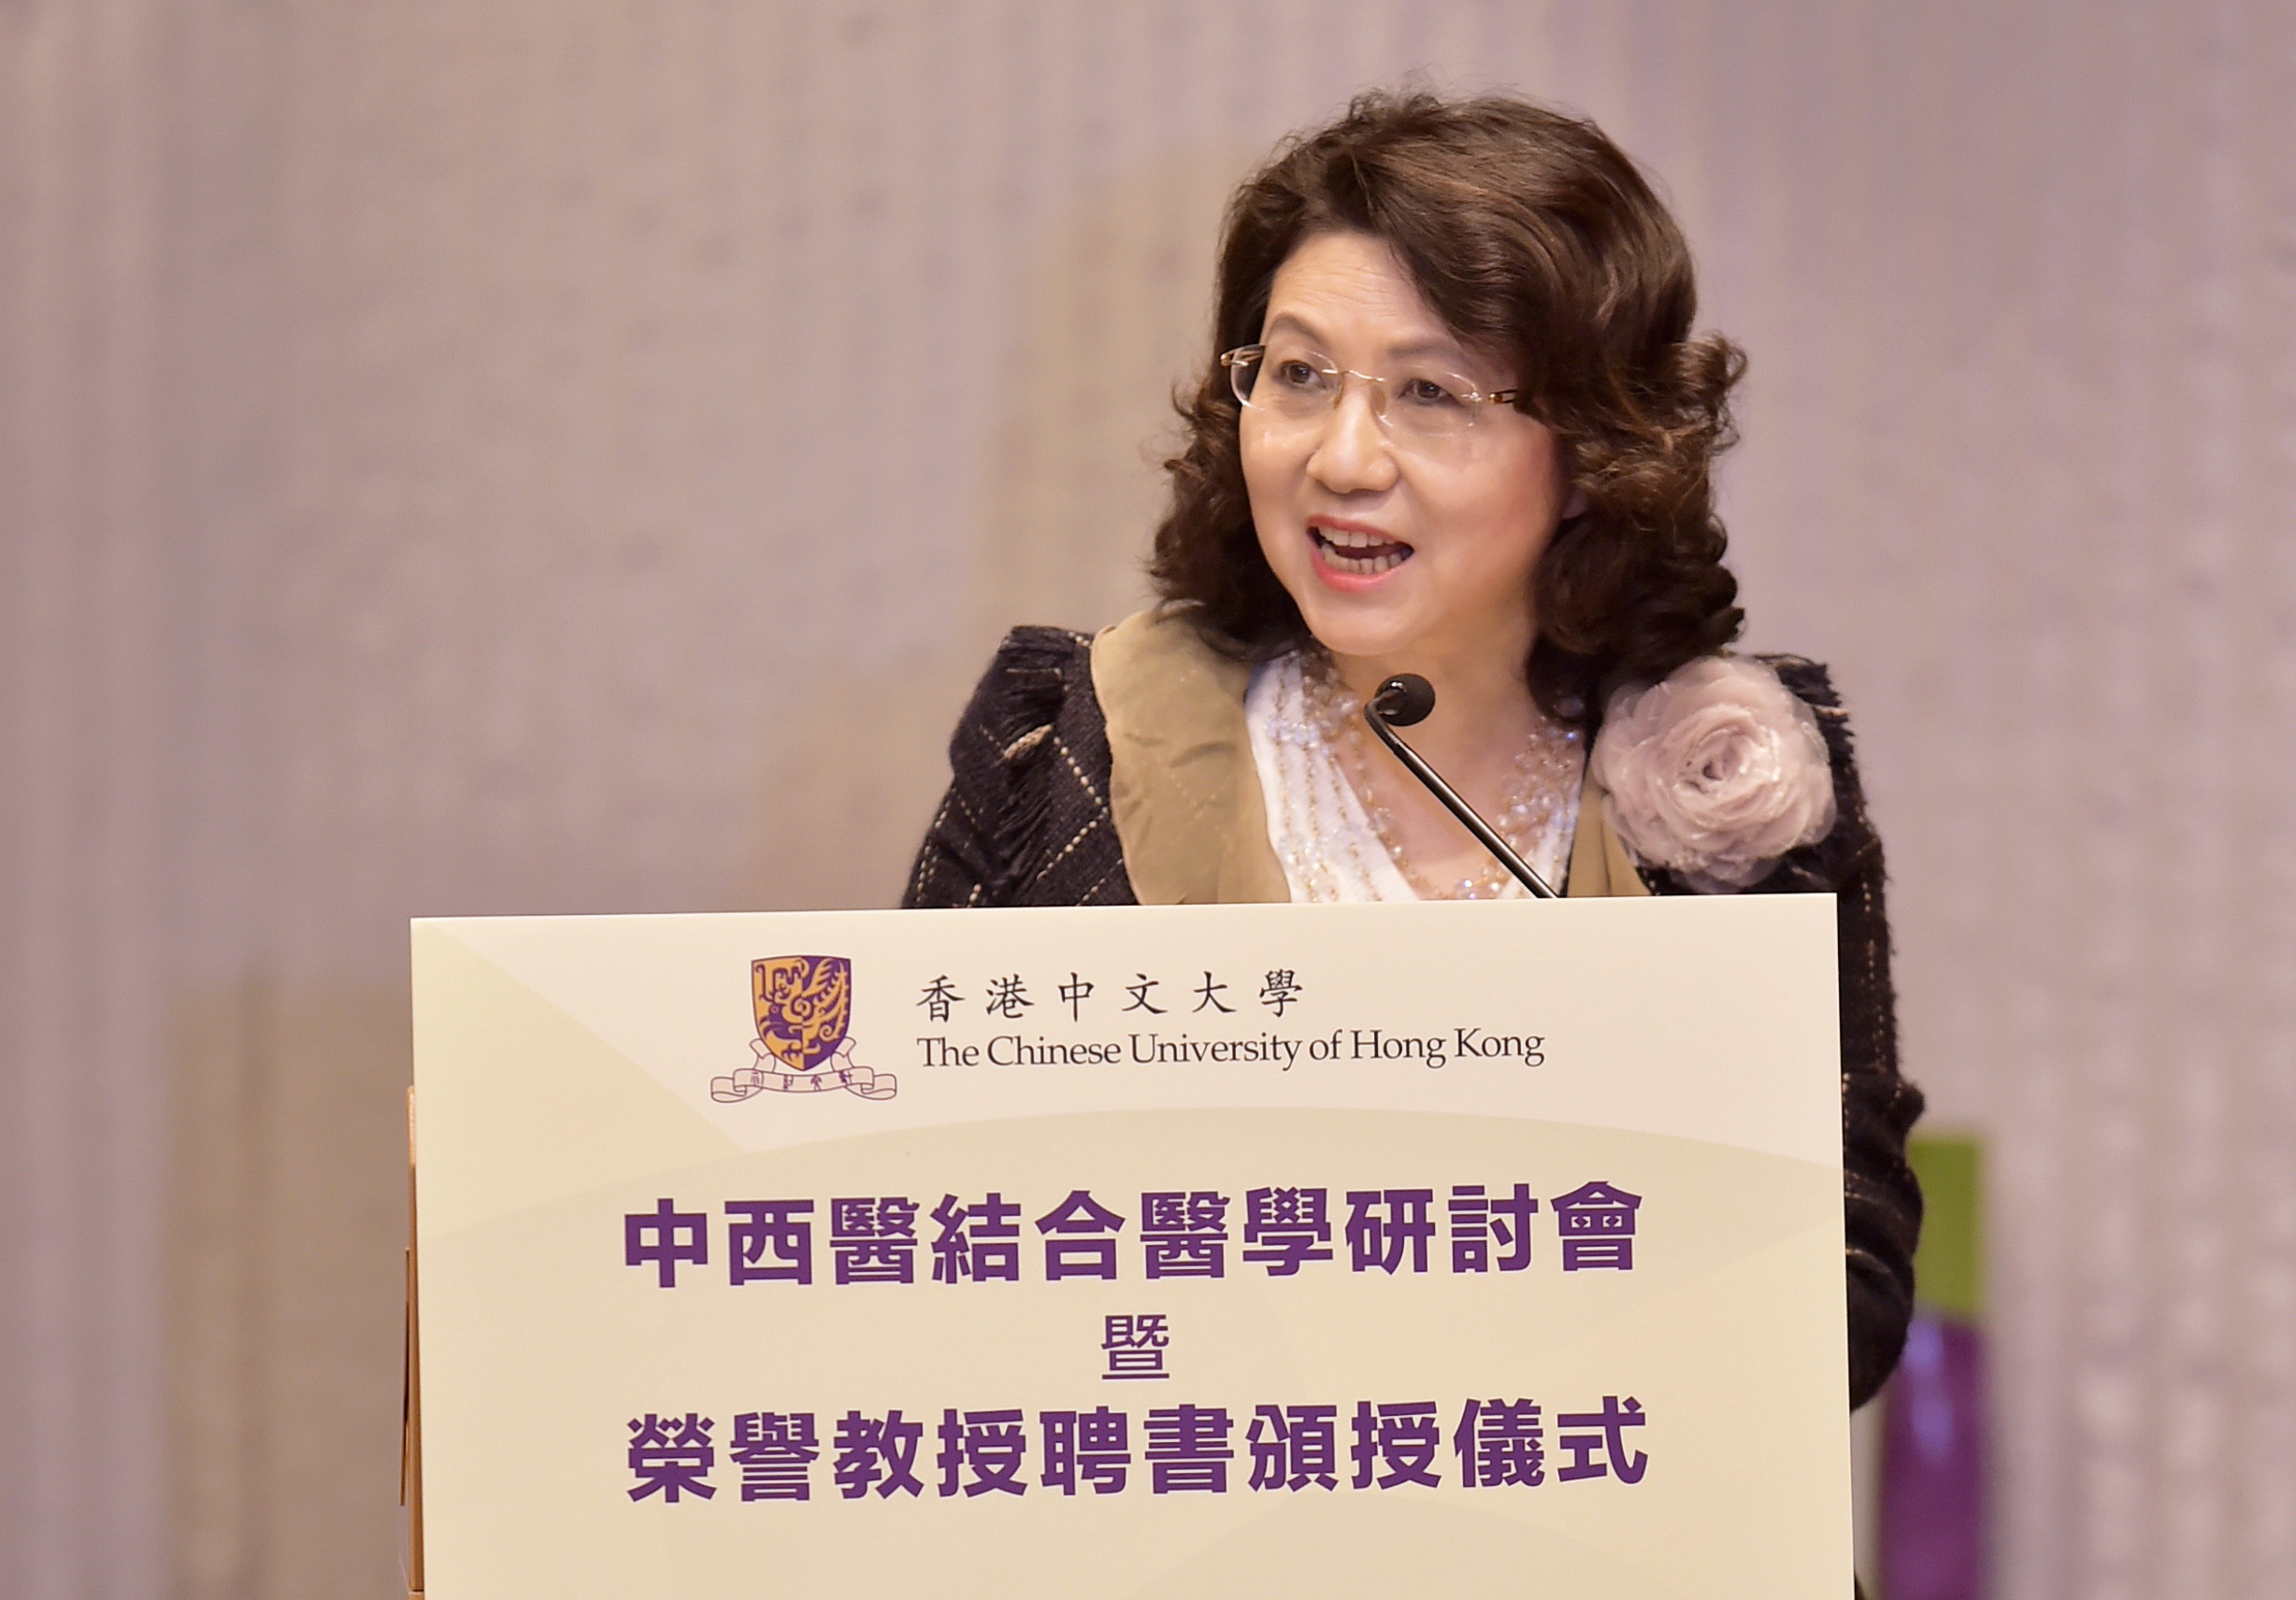 Miss Janet Wong, Commissioner for Innovation and Technology